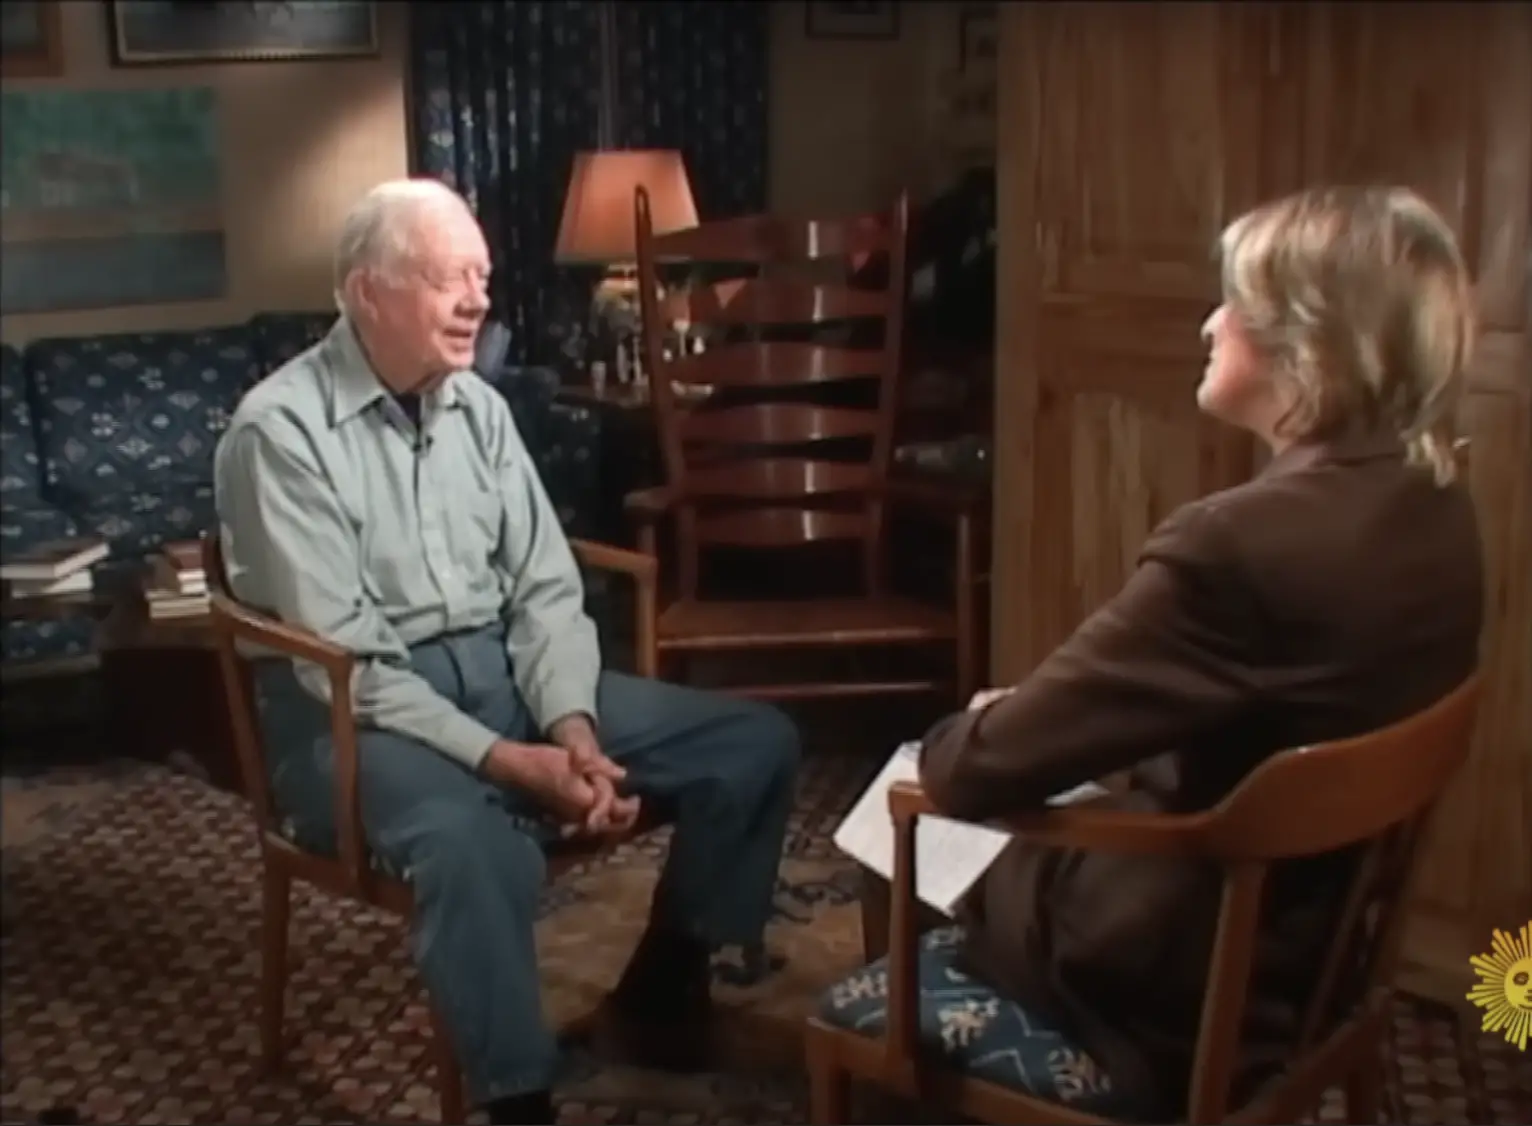 Jimmy Carter and an interviewer at his home in Plains, Georgia. | Source: YouTube/CBSundayMorning